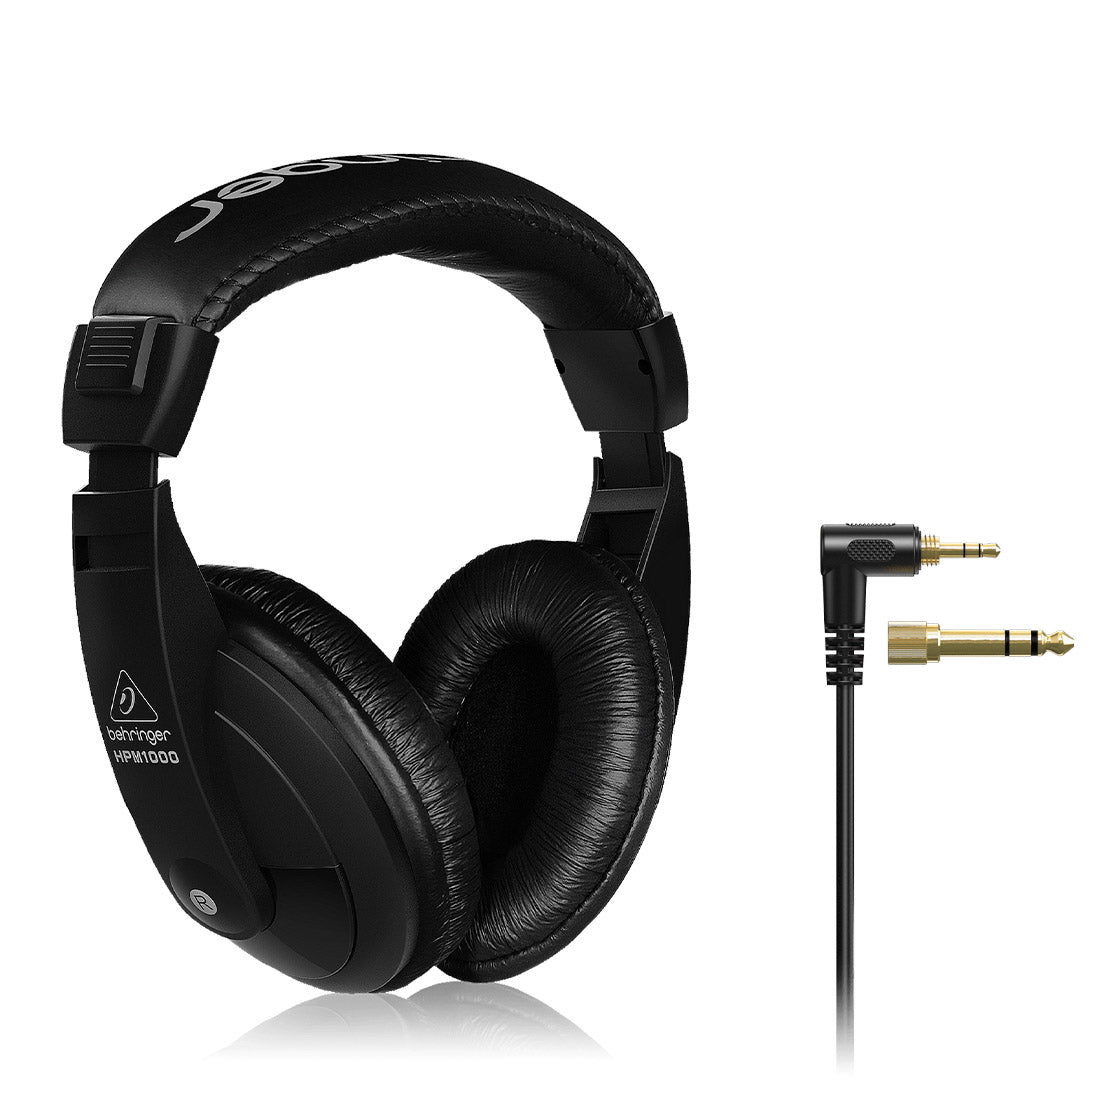 Behringer HPM1000 Over-Ear Wired Headset with 40mm Drivers and High Dynamic Range - Black